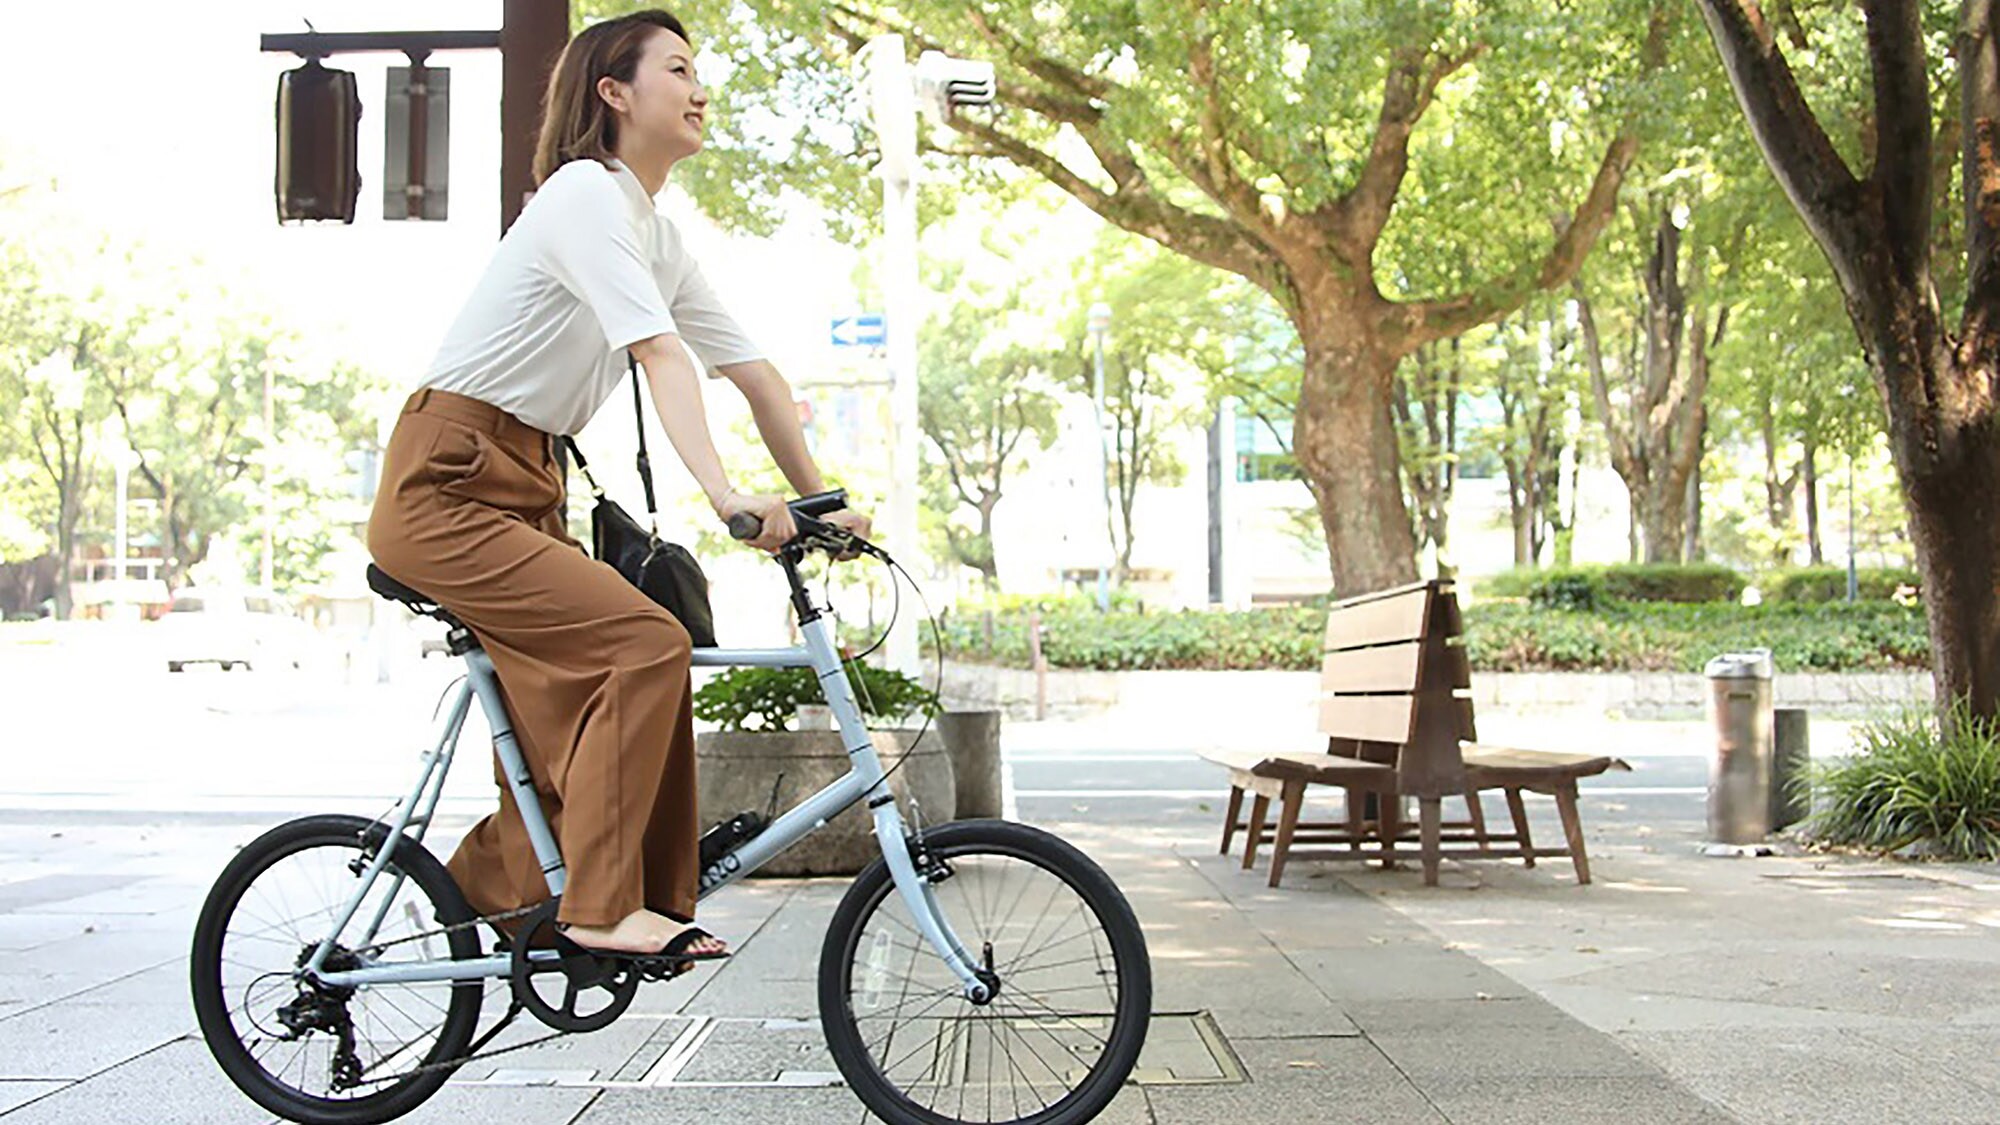 Bicycle rental (first-come-first-served basis, free of charge) *Image